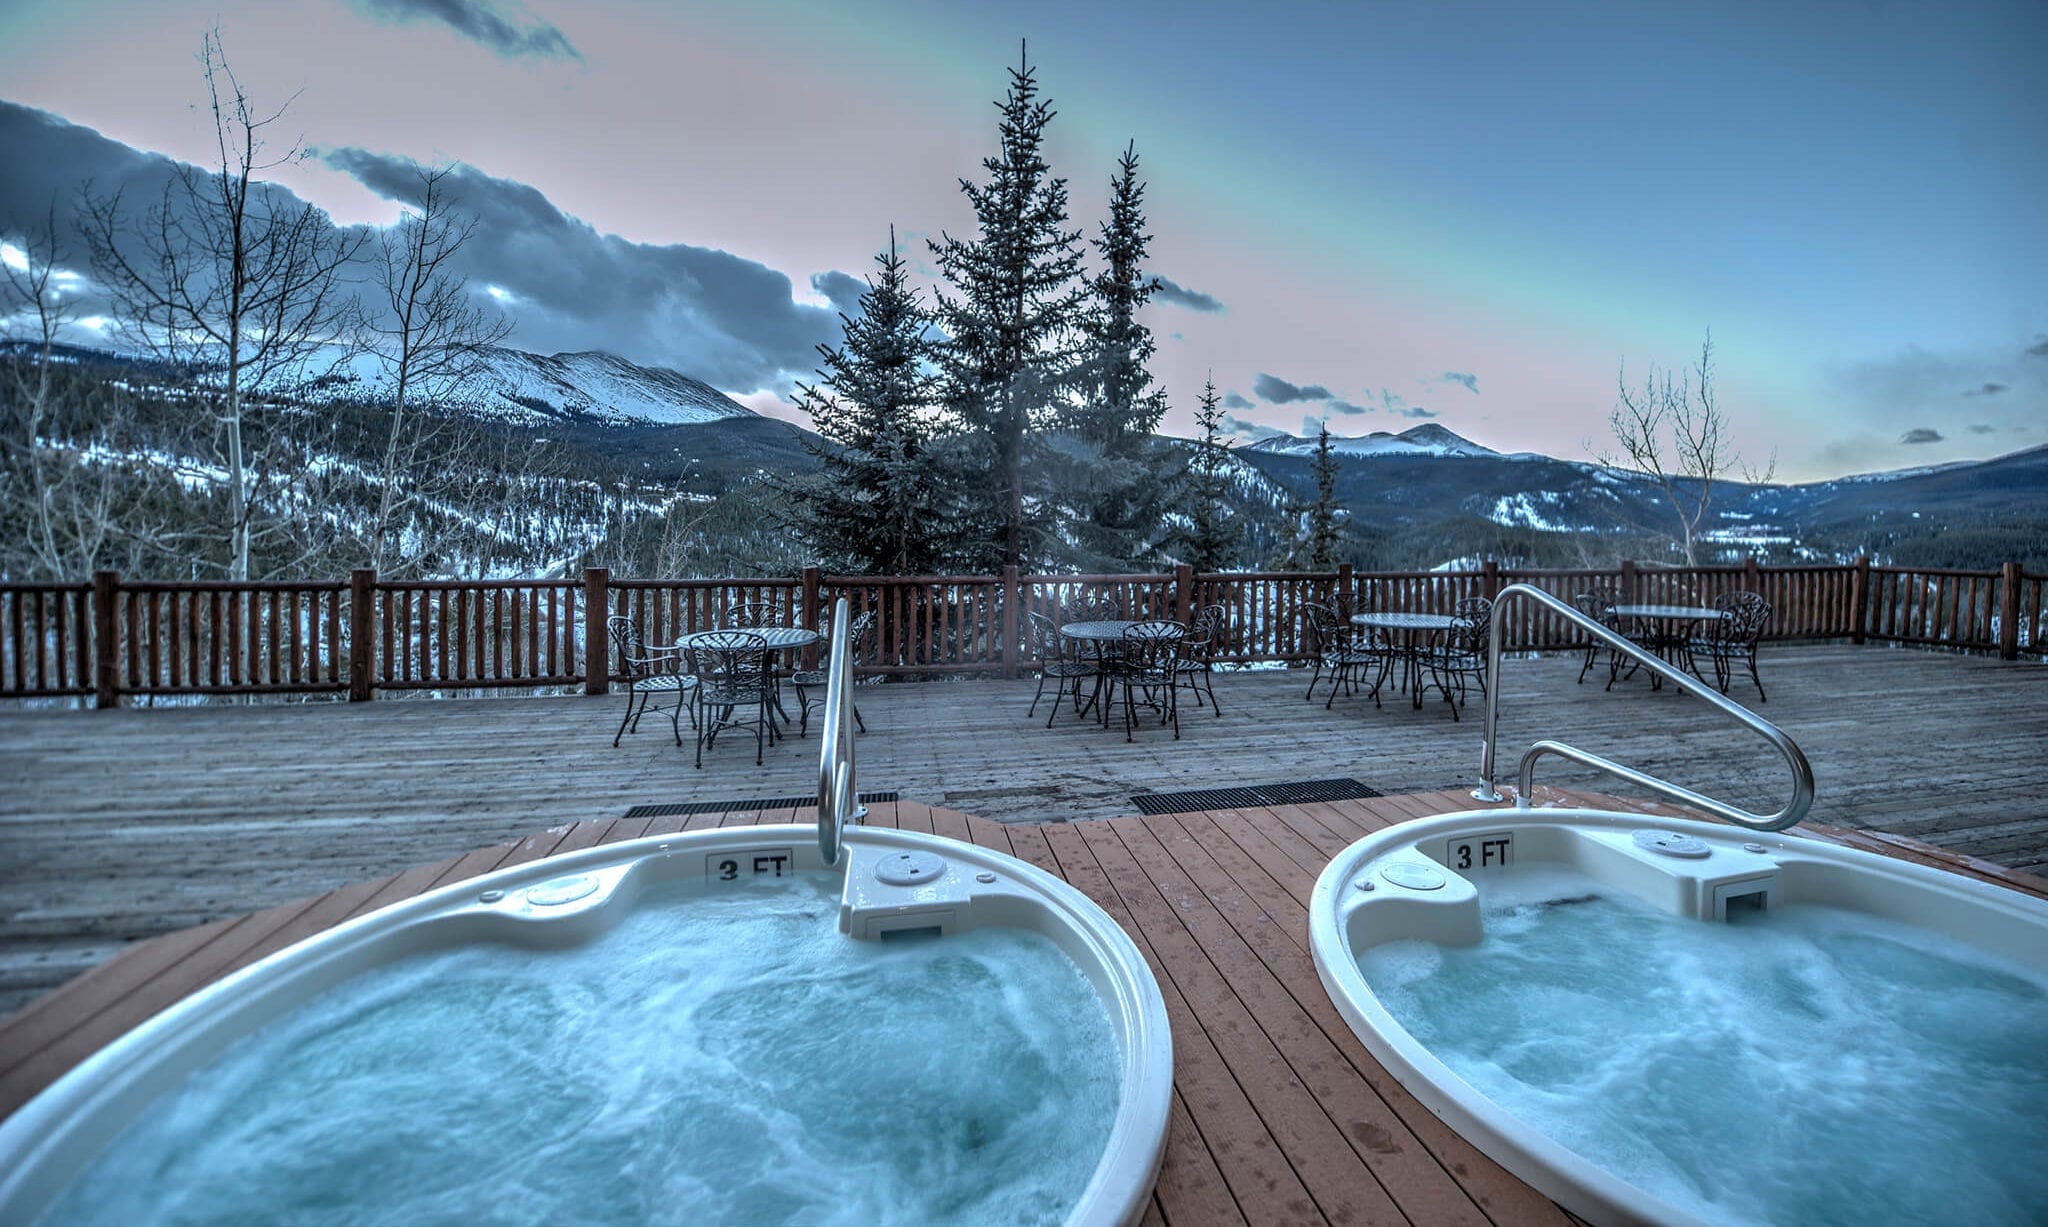 Hot tubs at the Lodge in Breckenridge